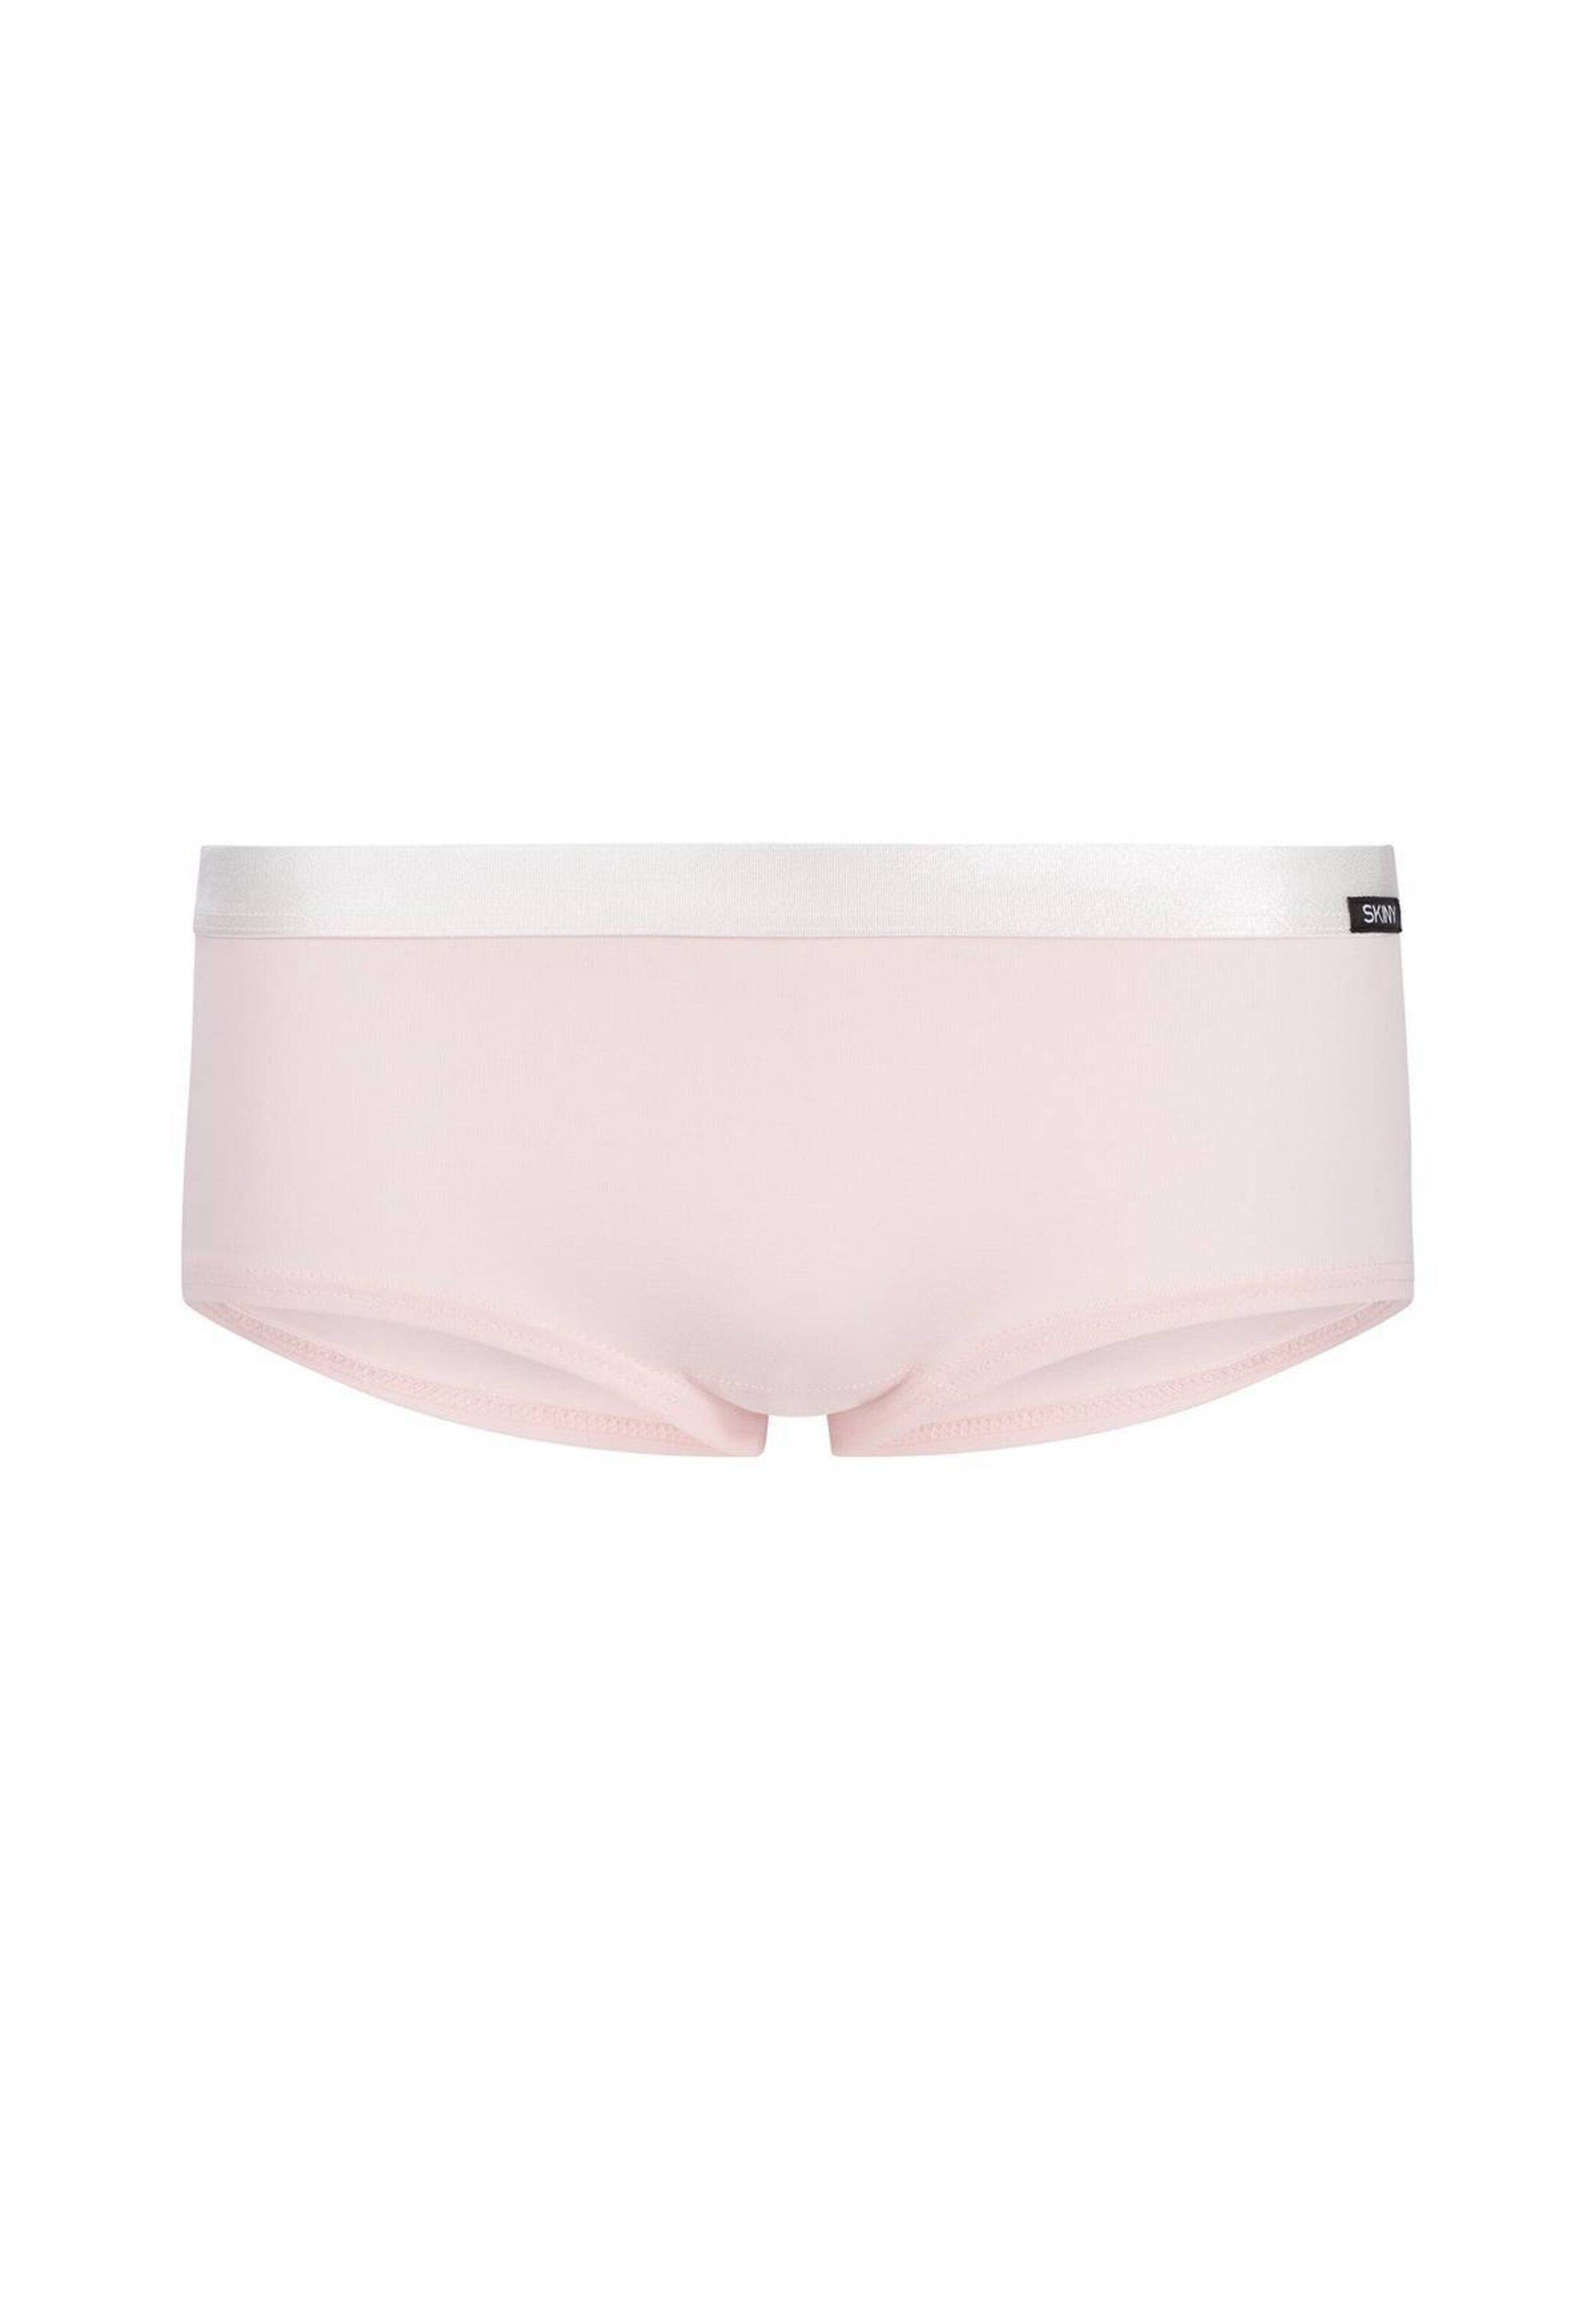 Rosa/Beige Panty Skiny Weiteres Detail (2-St)